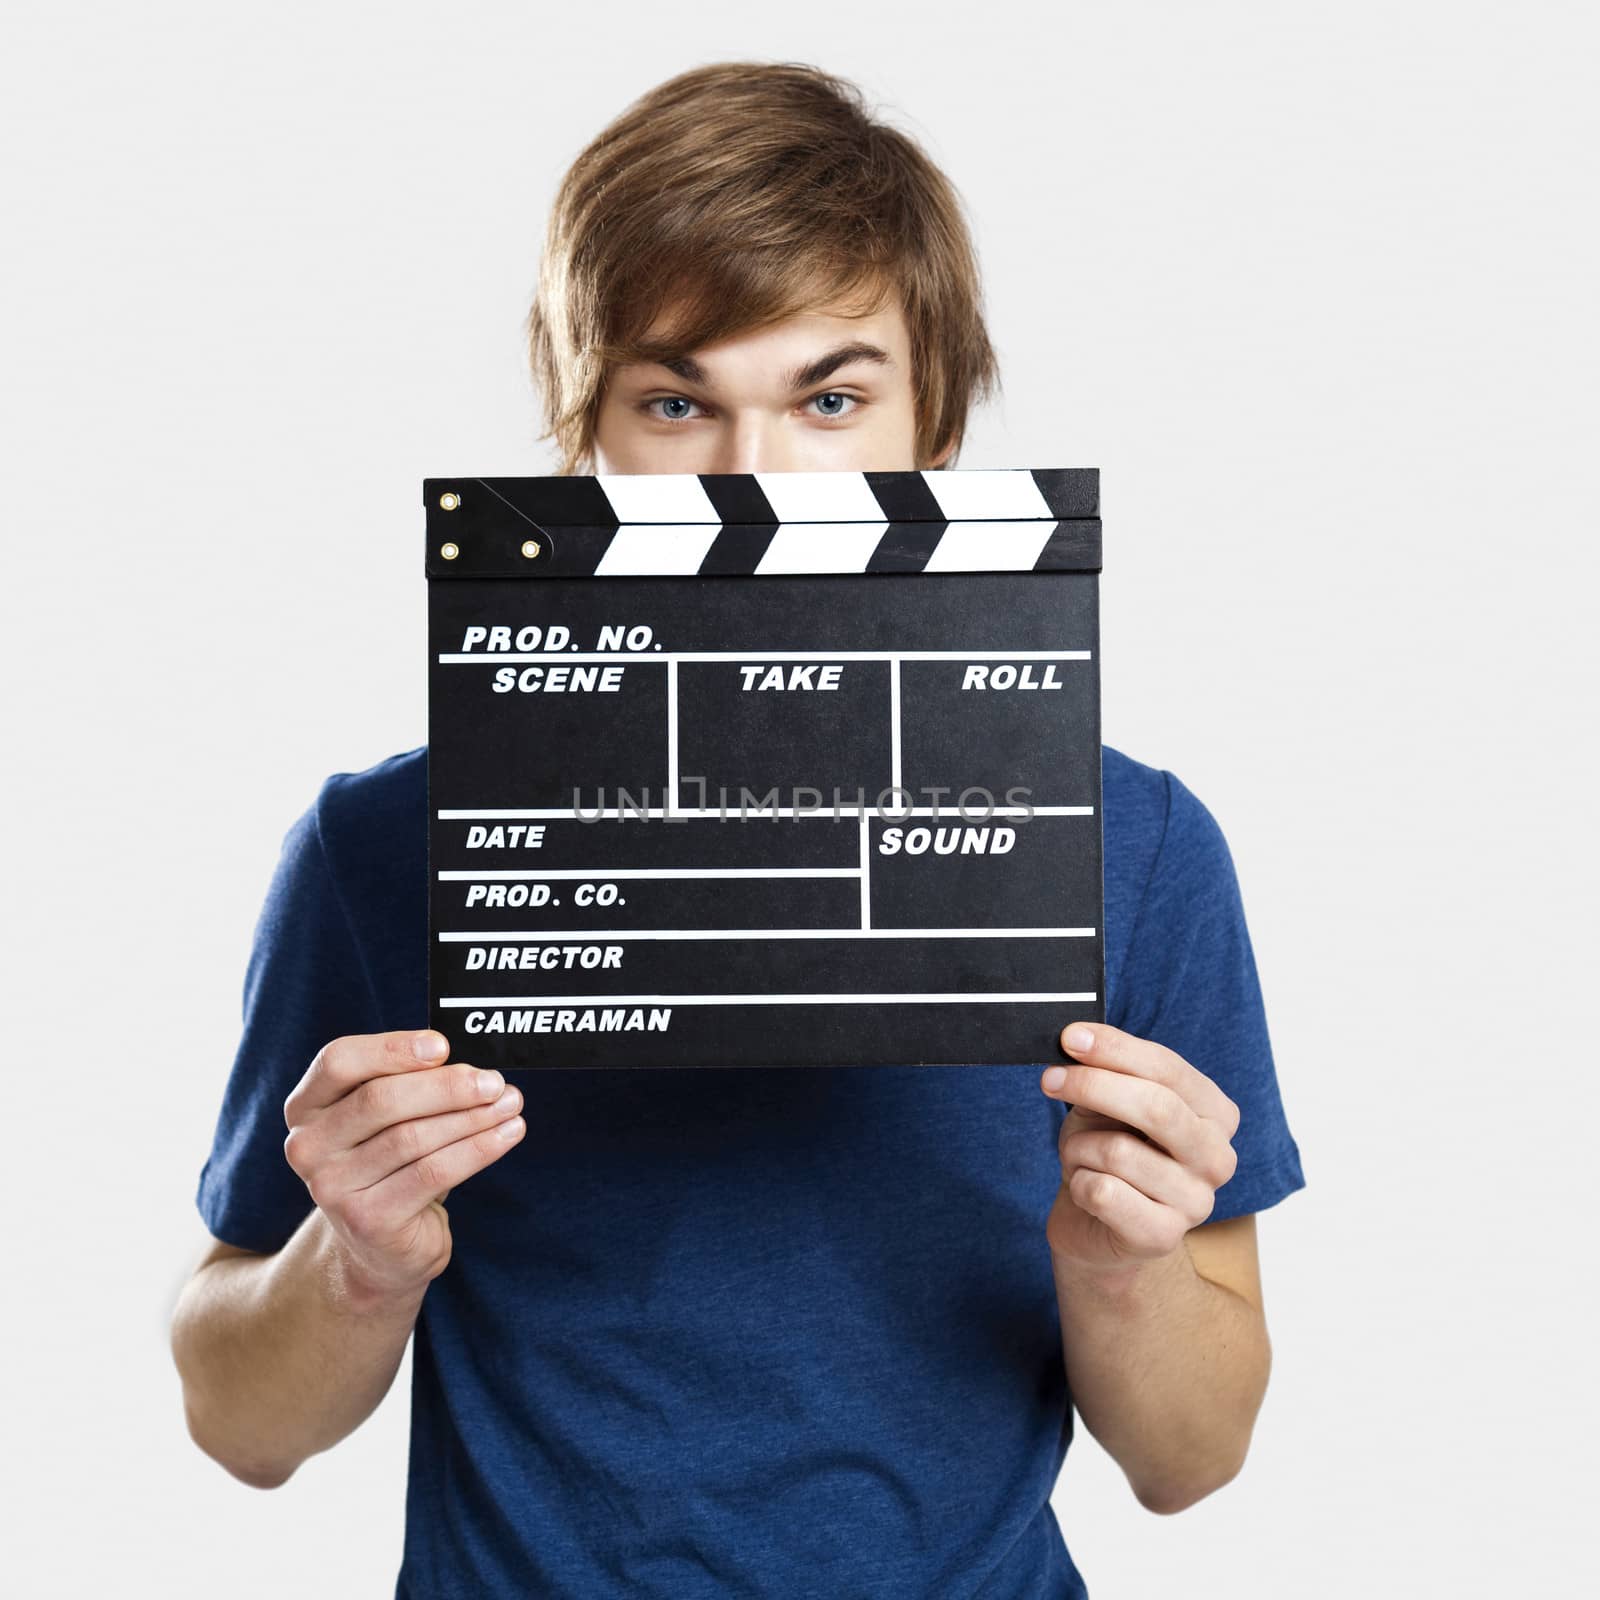 Showing a clapboard by Iko